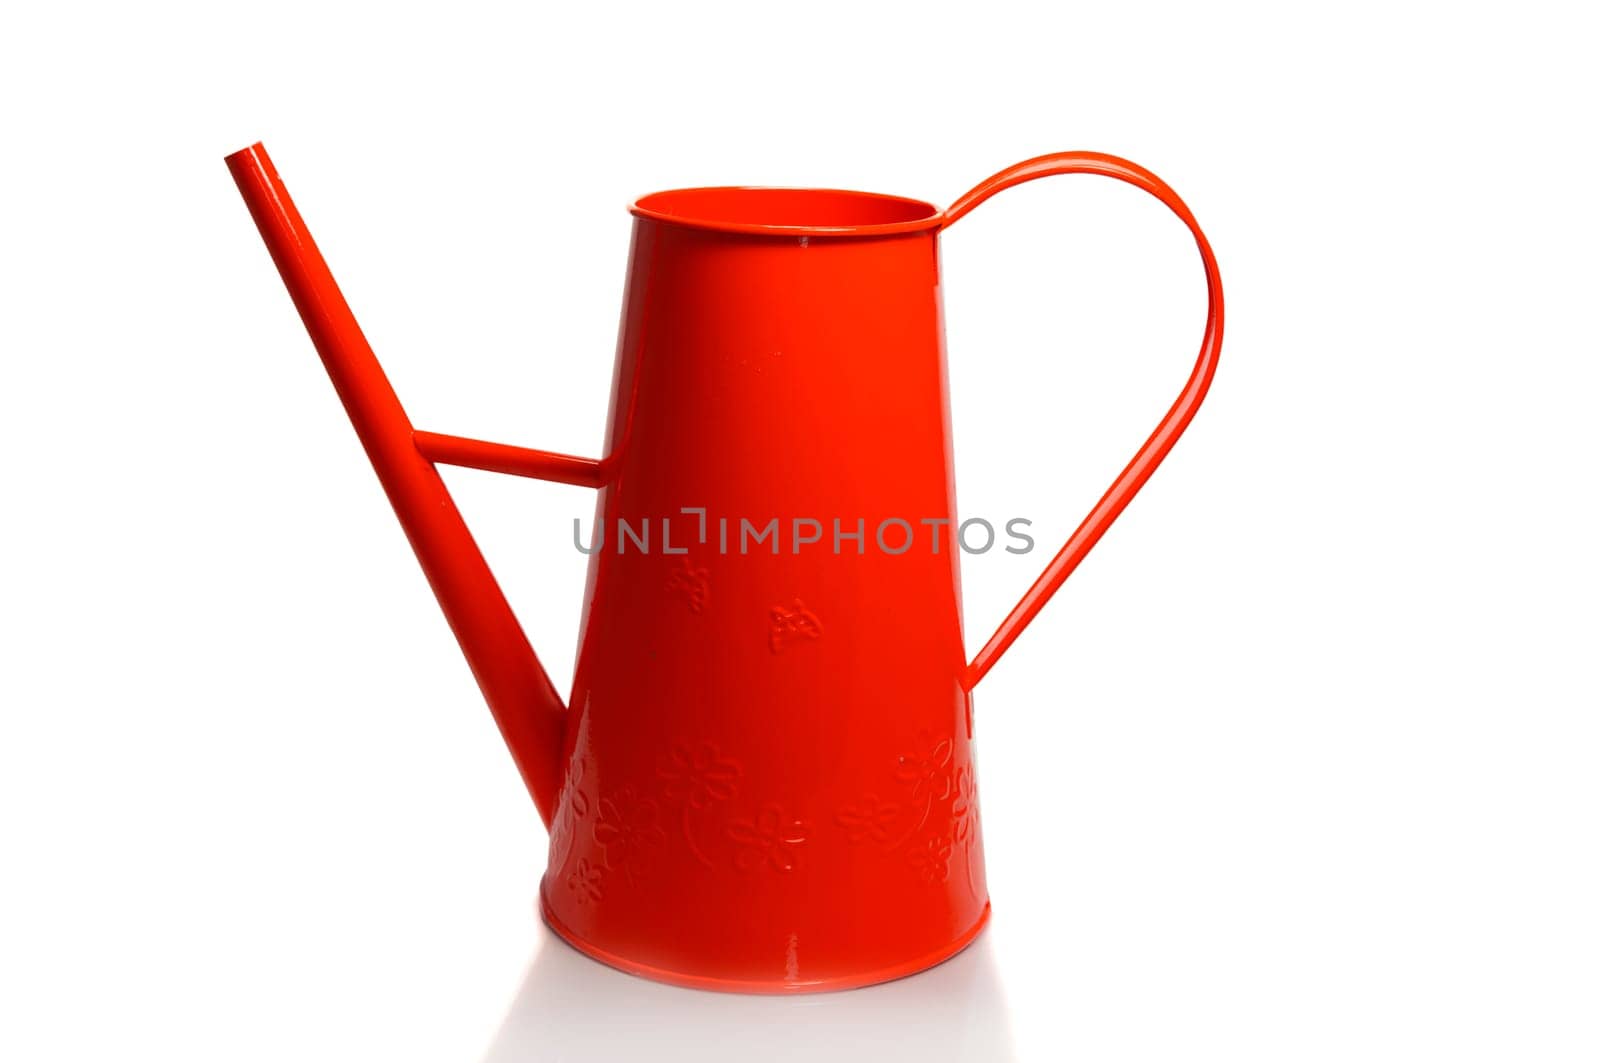 redwatering can garden tool on white background by compuinfoto